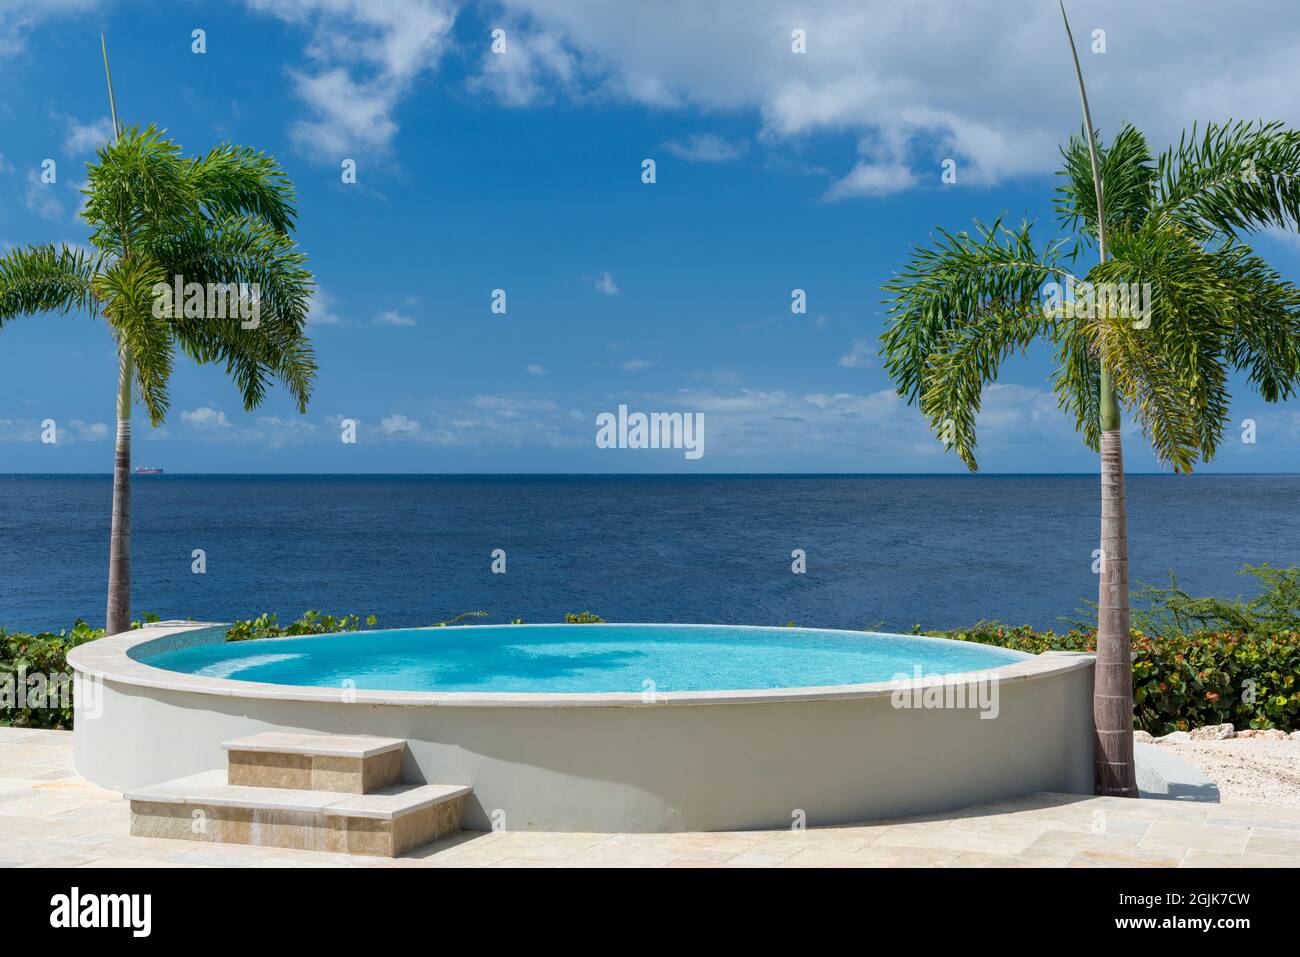 Summer and winter vacation destination, views of Curacao island, with private swimming poo, tropical flora and blue water of Carribean sea Stock Photo